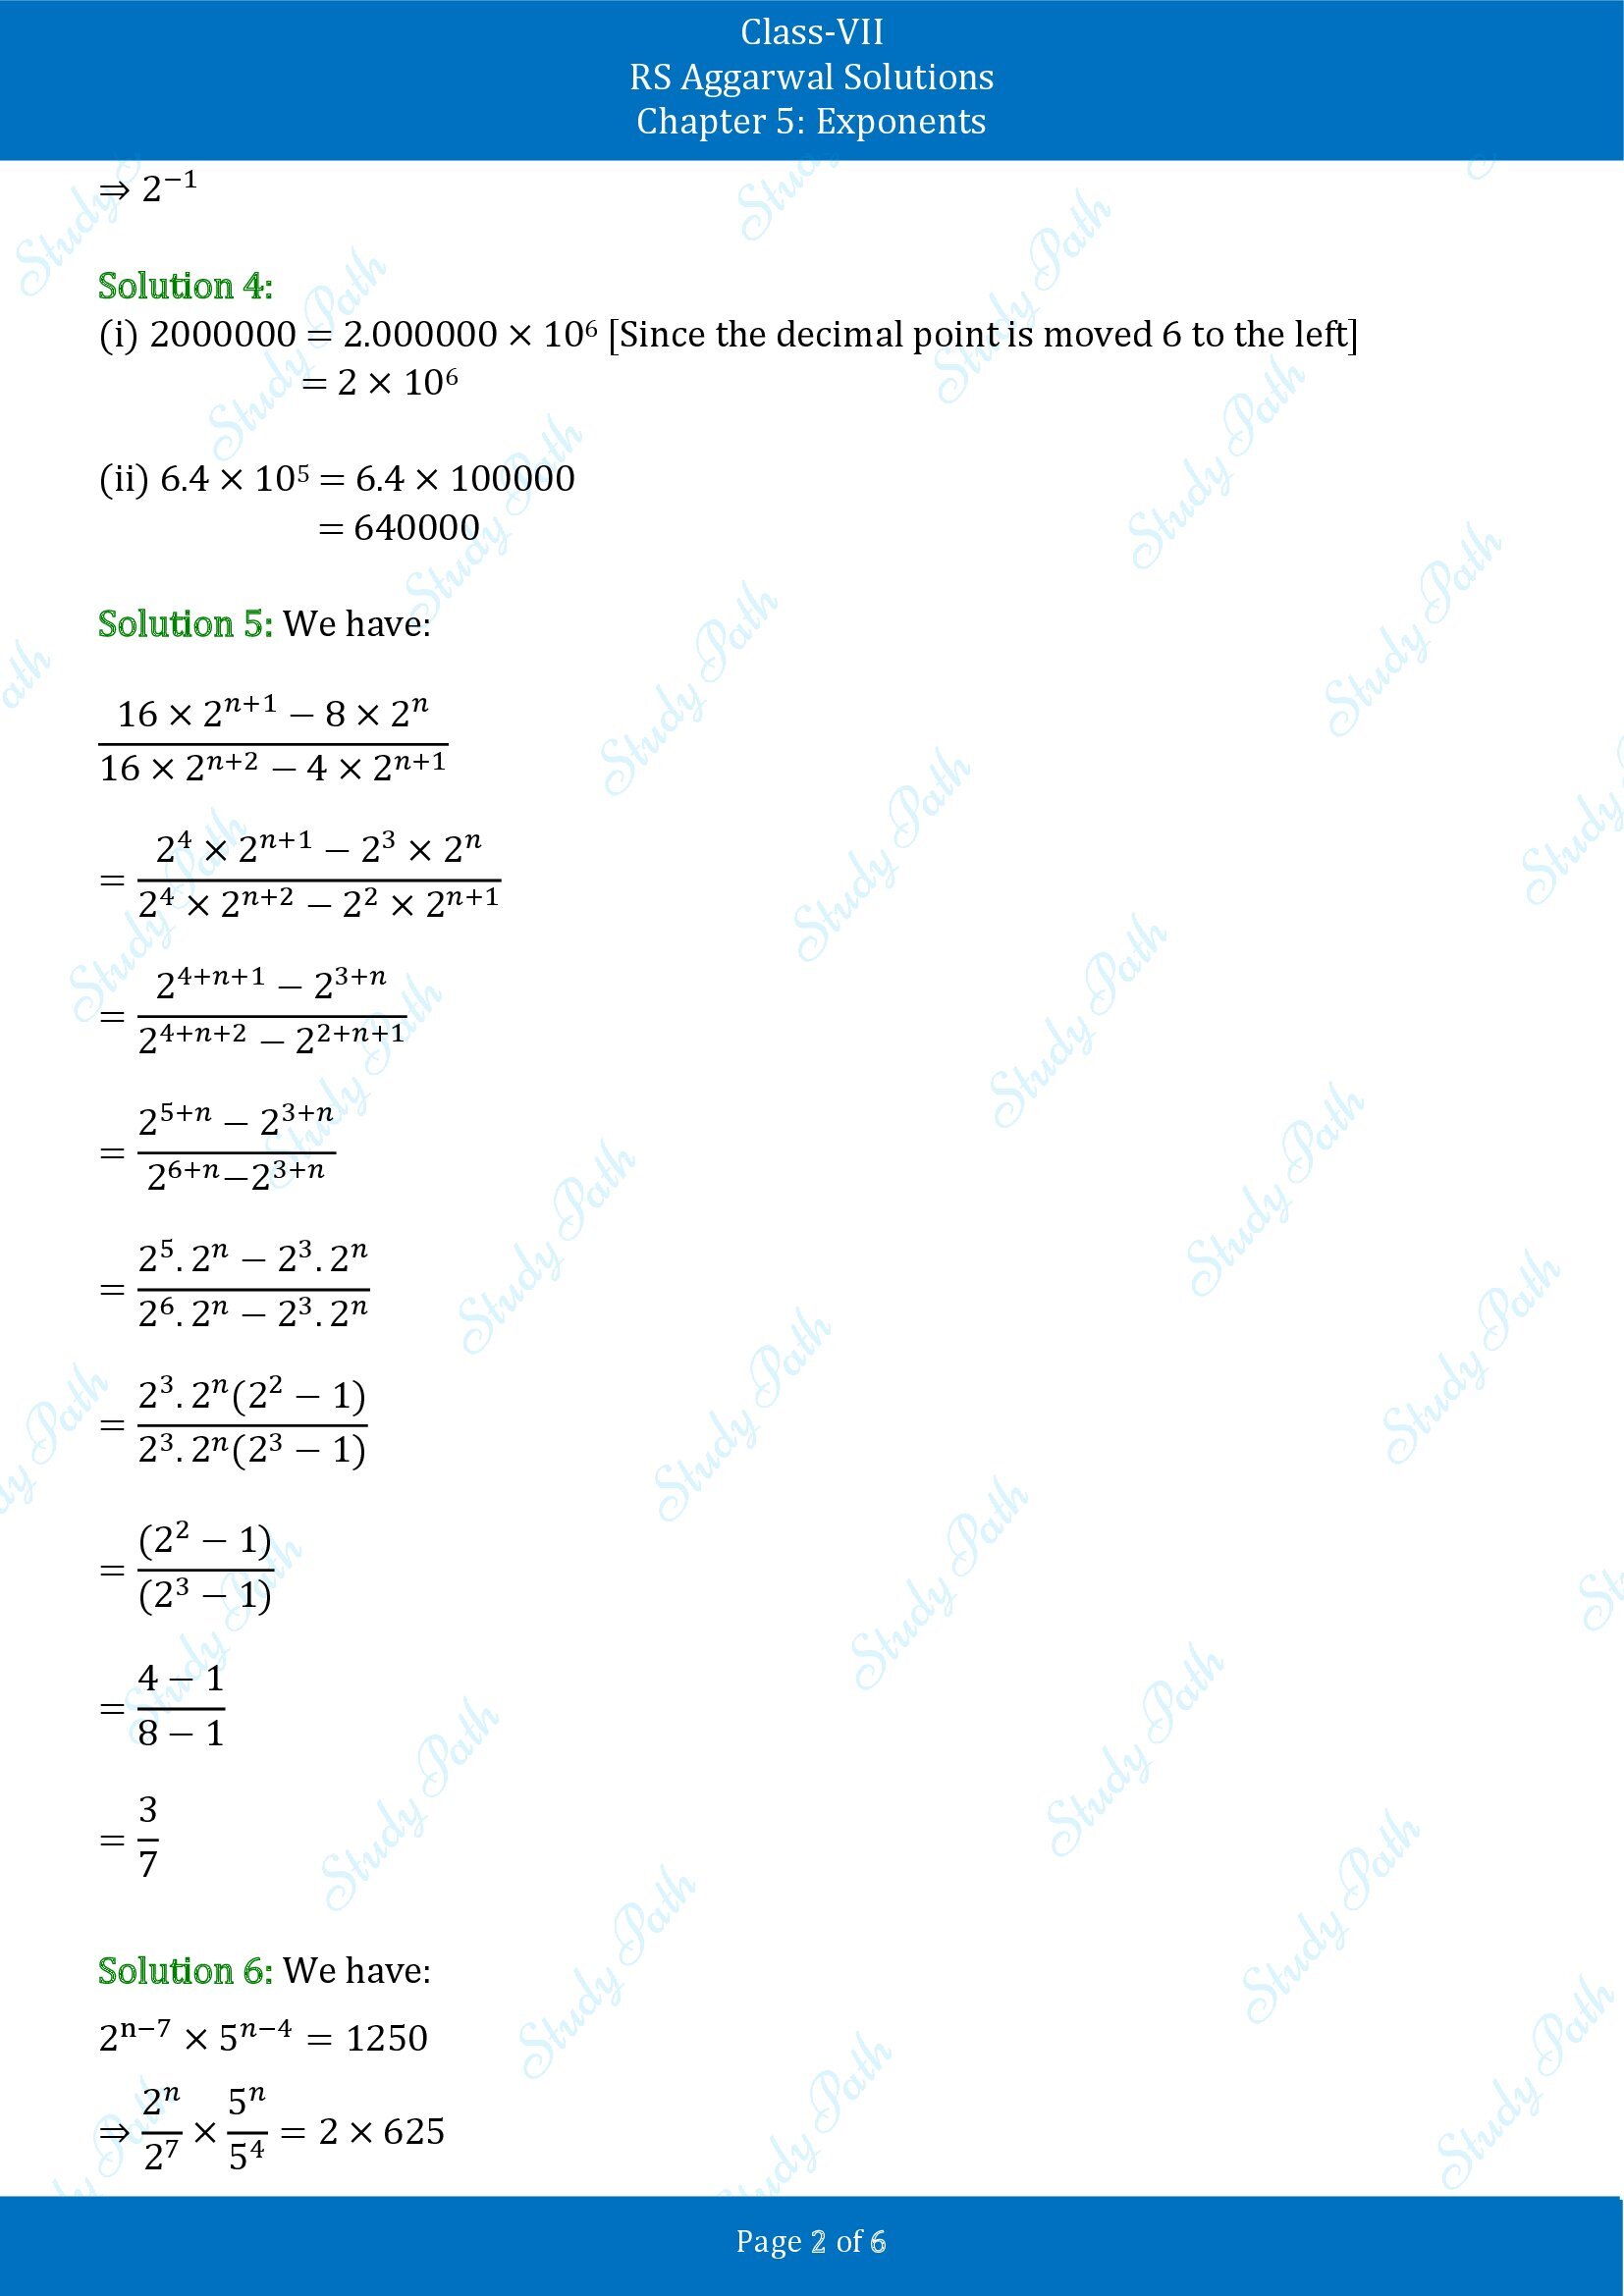 RS Aggarwal Solutions Class 7 Chapter 5 Exponents Test Paper 00002